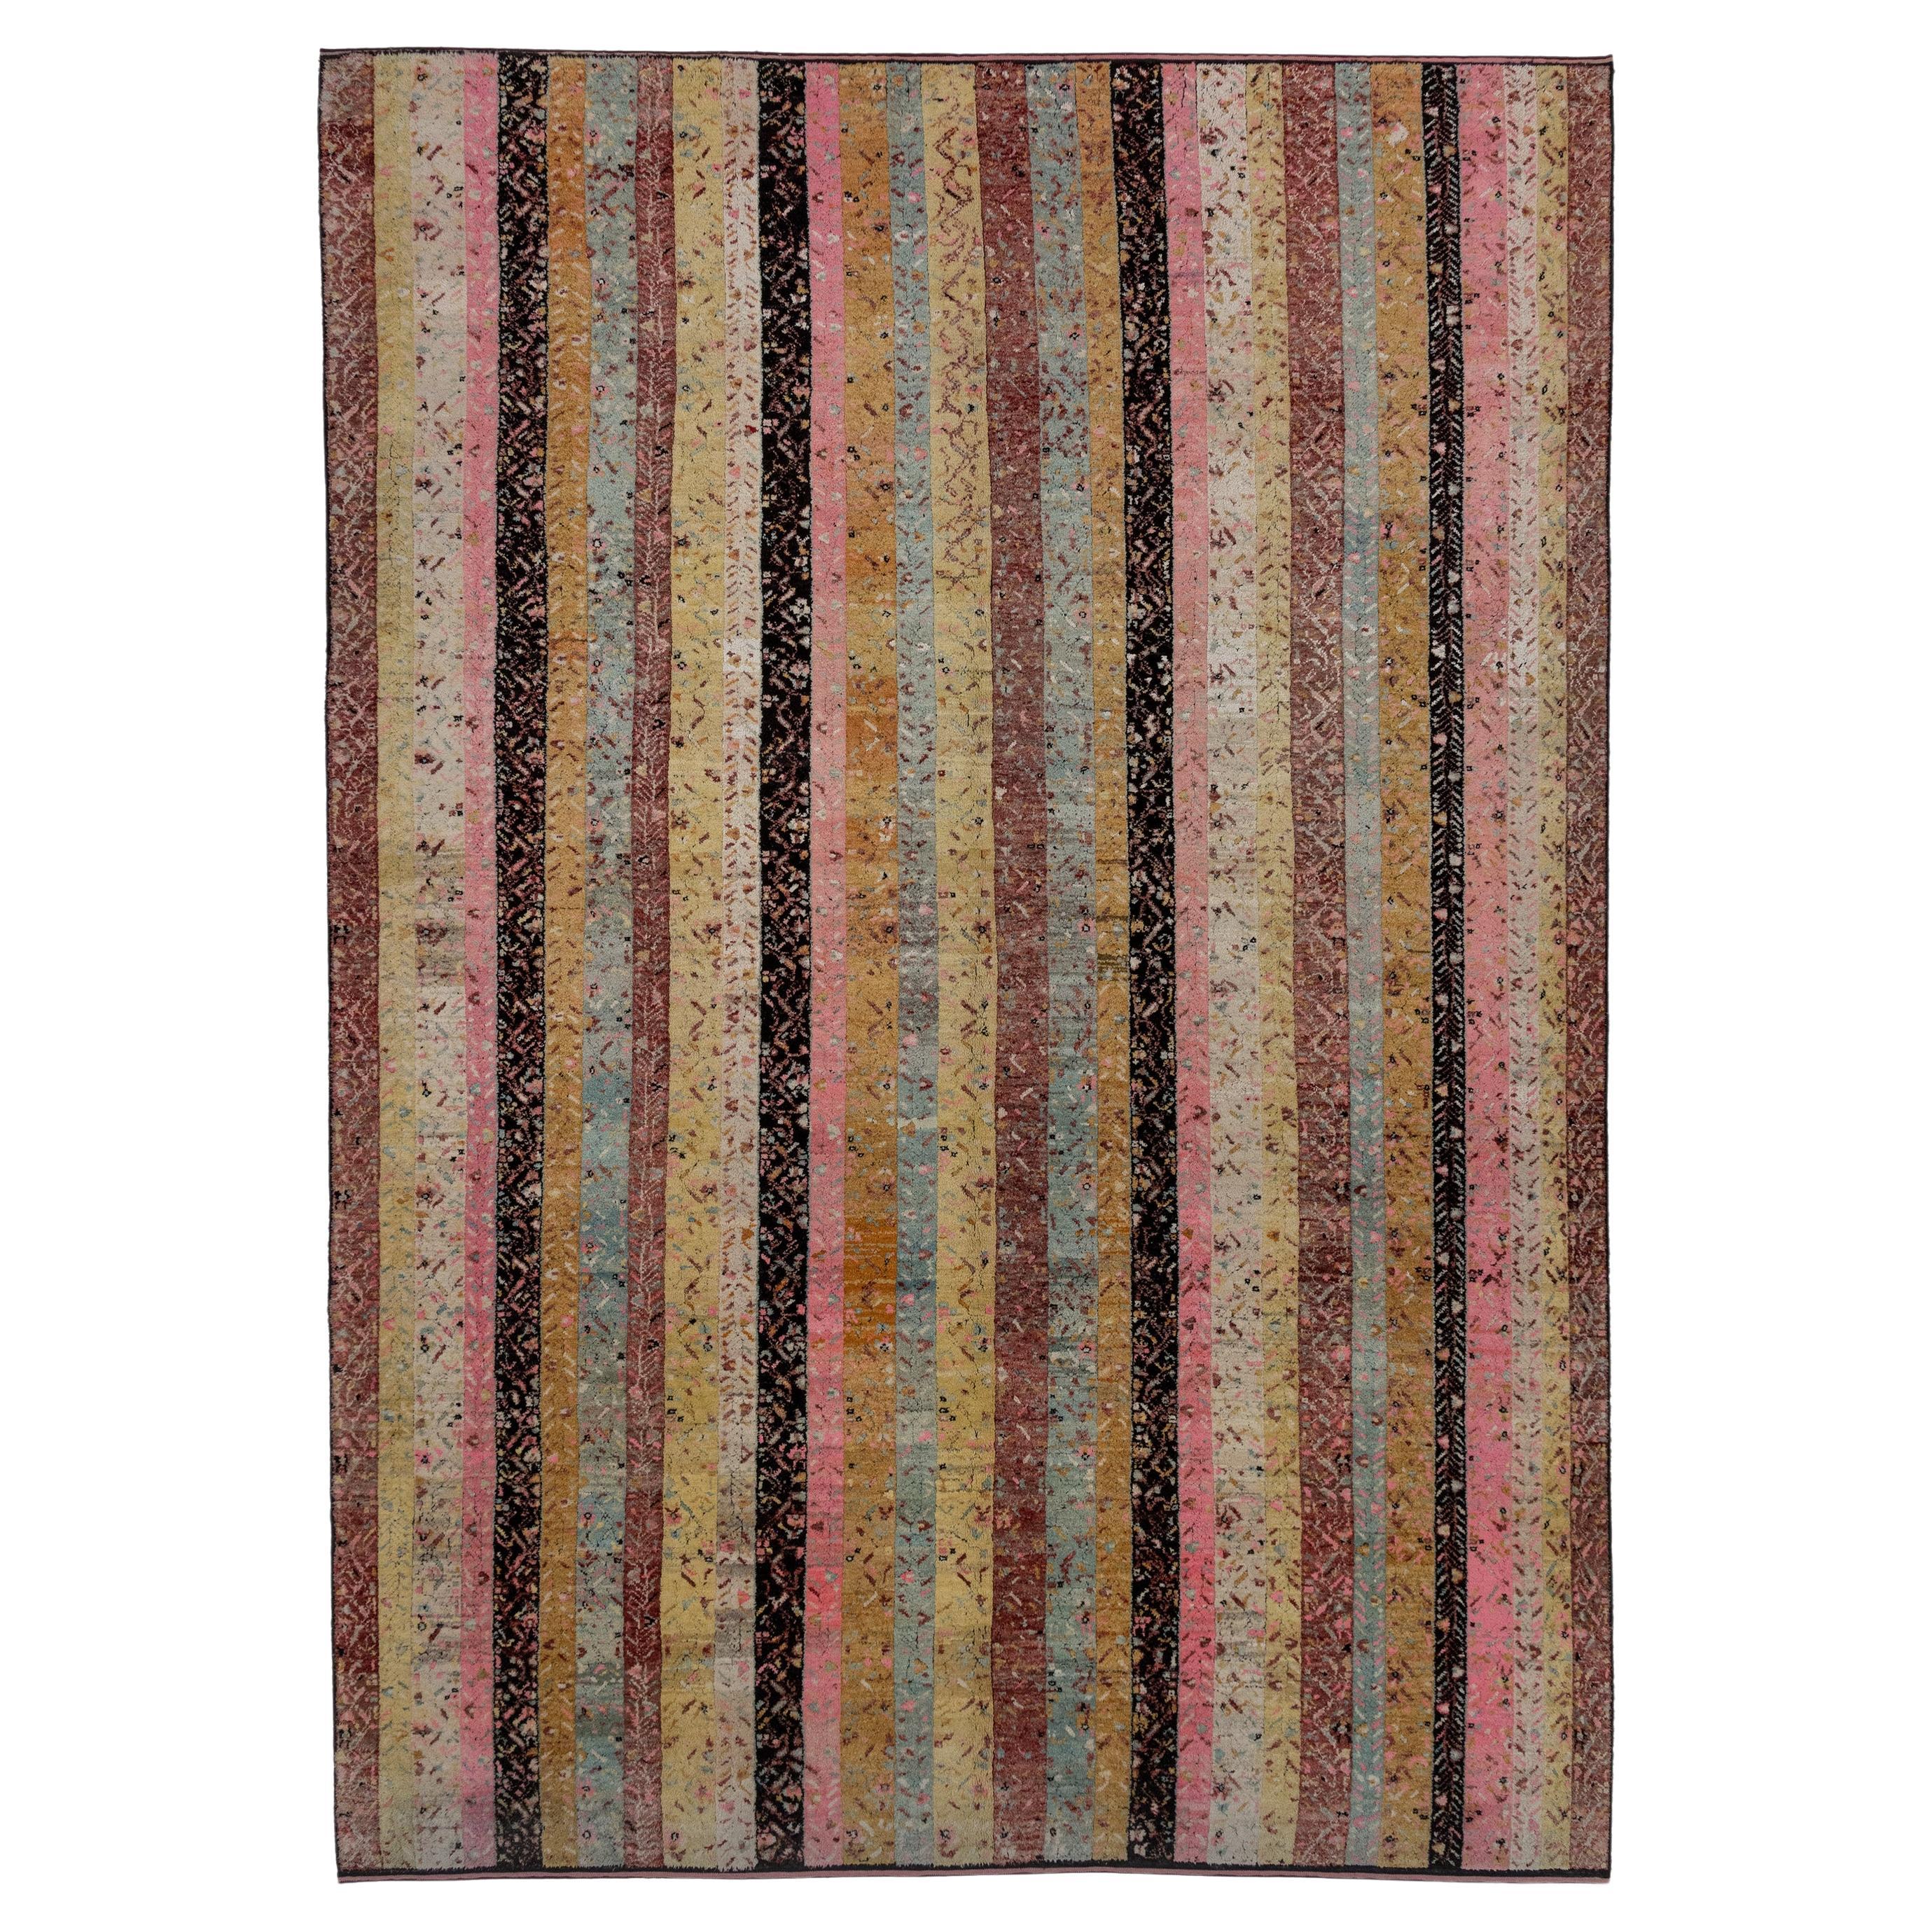 Old Yarn Striped Rug For Sale